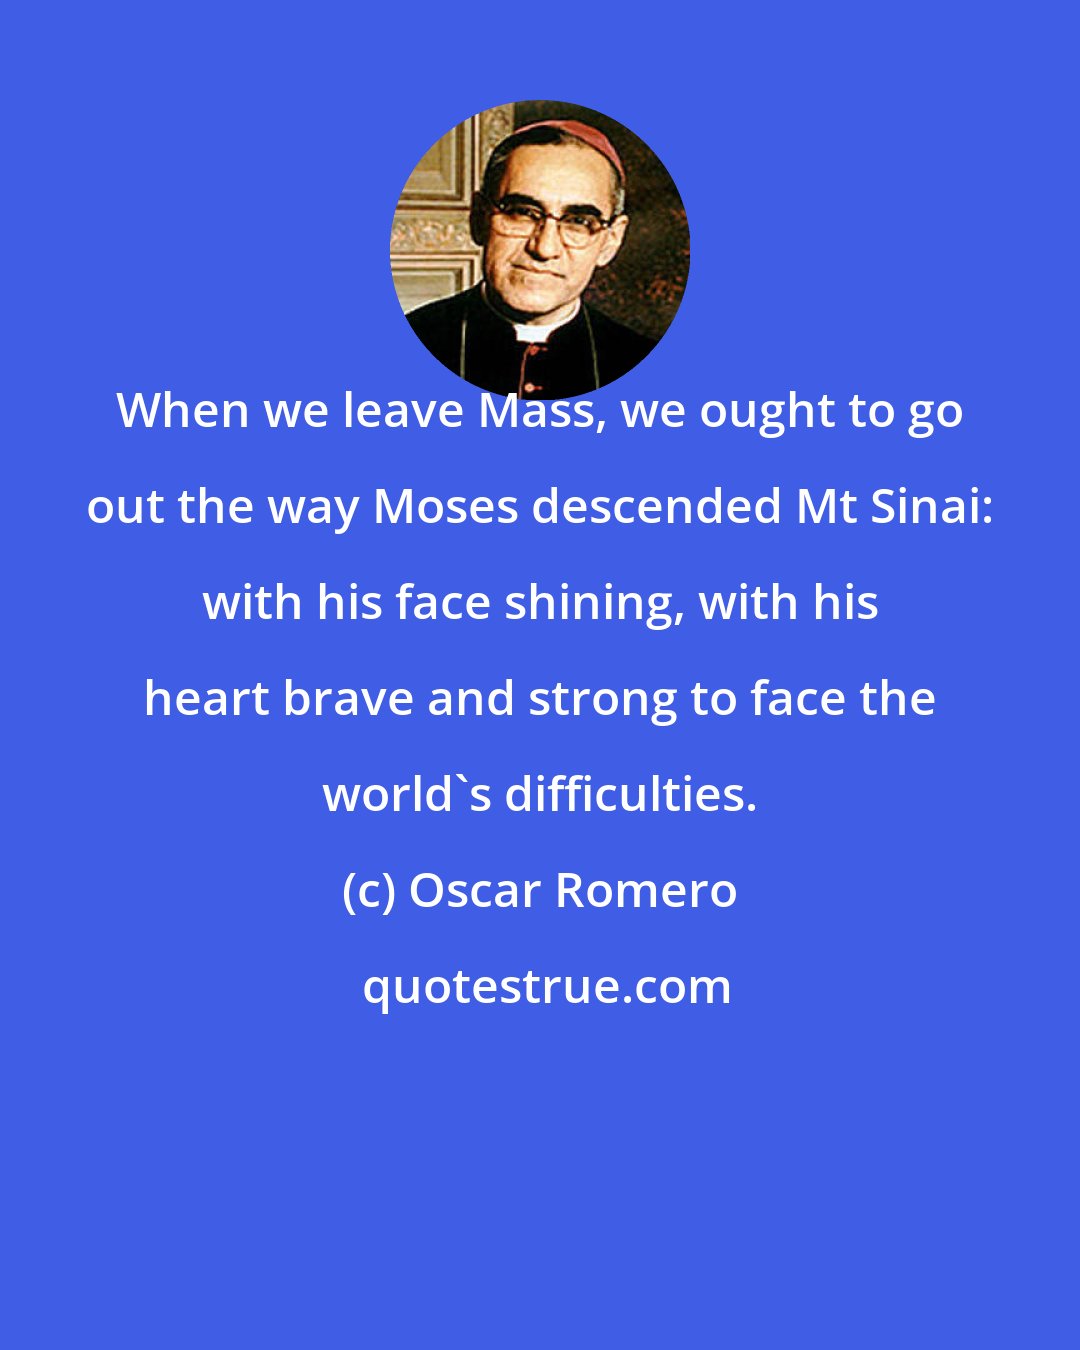 Oscar Romero: When we leave Mass, we ought to go out the way Moses descended Mt Sinai: with his face shining, with his heart brave and strong to face the world's difficulties.